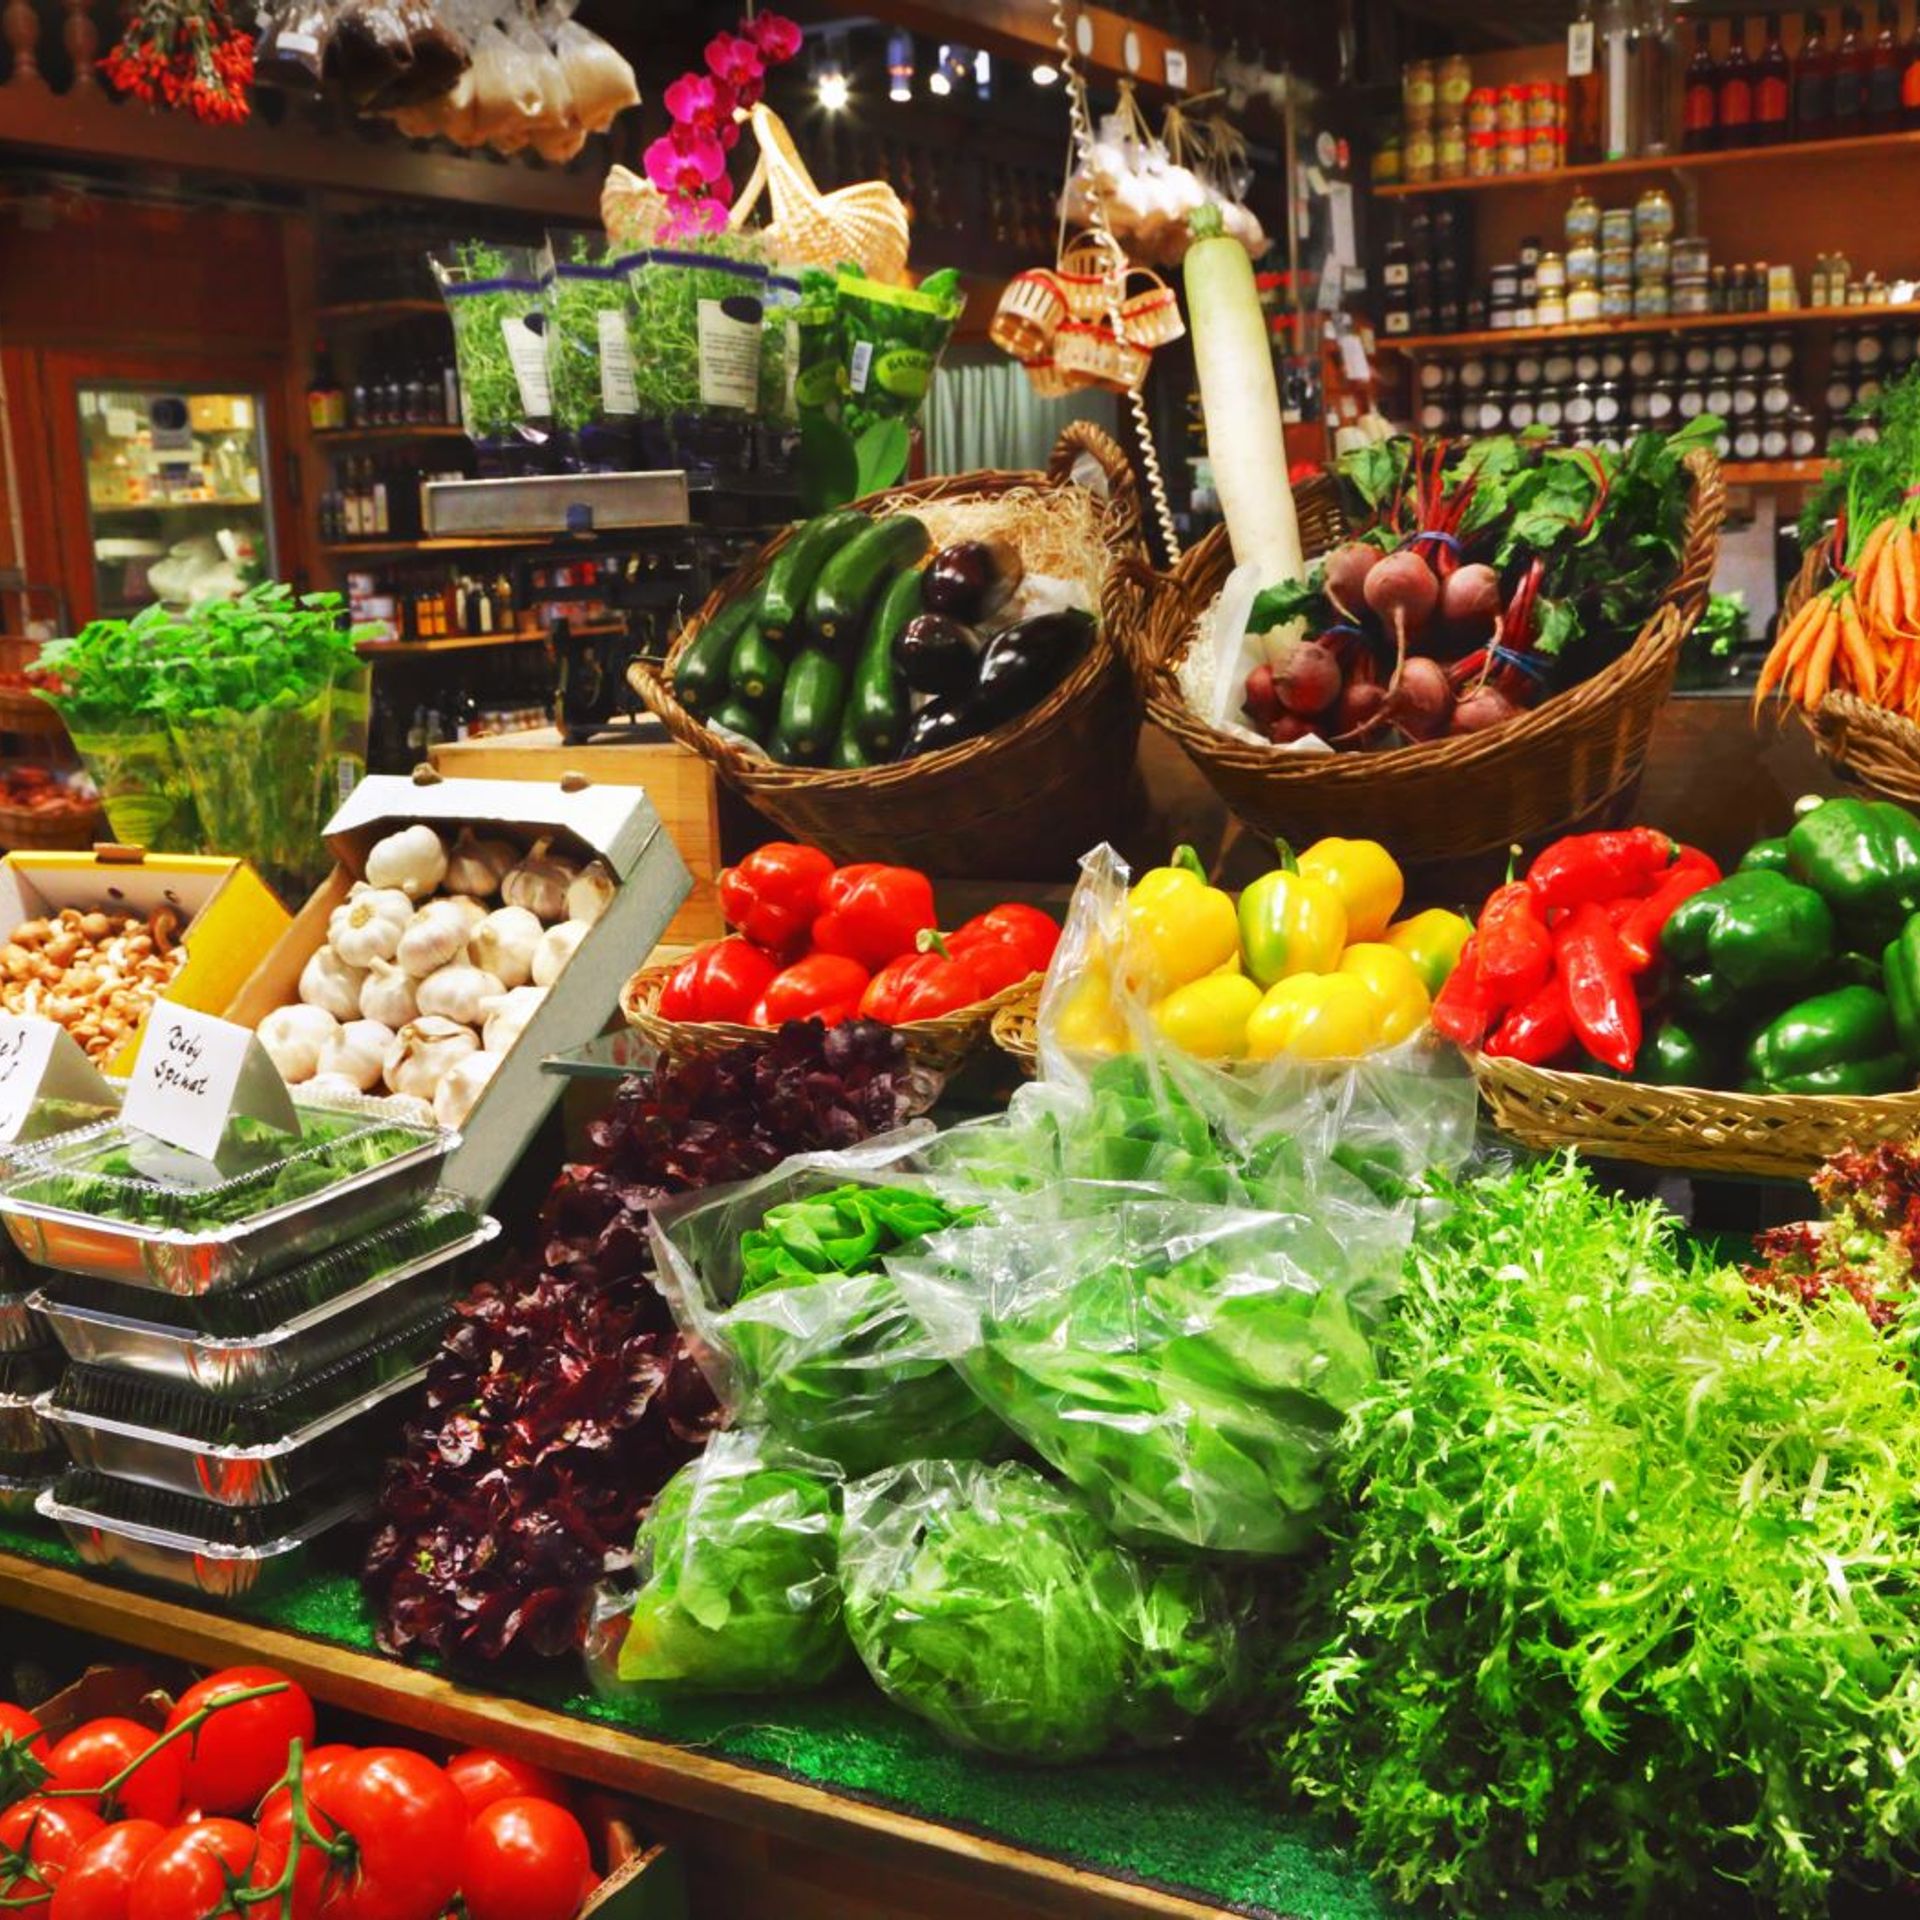 Image of the fresh produce section in a large retail store